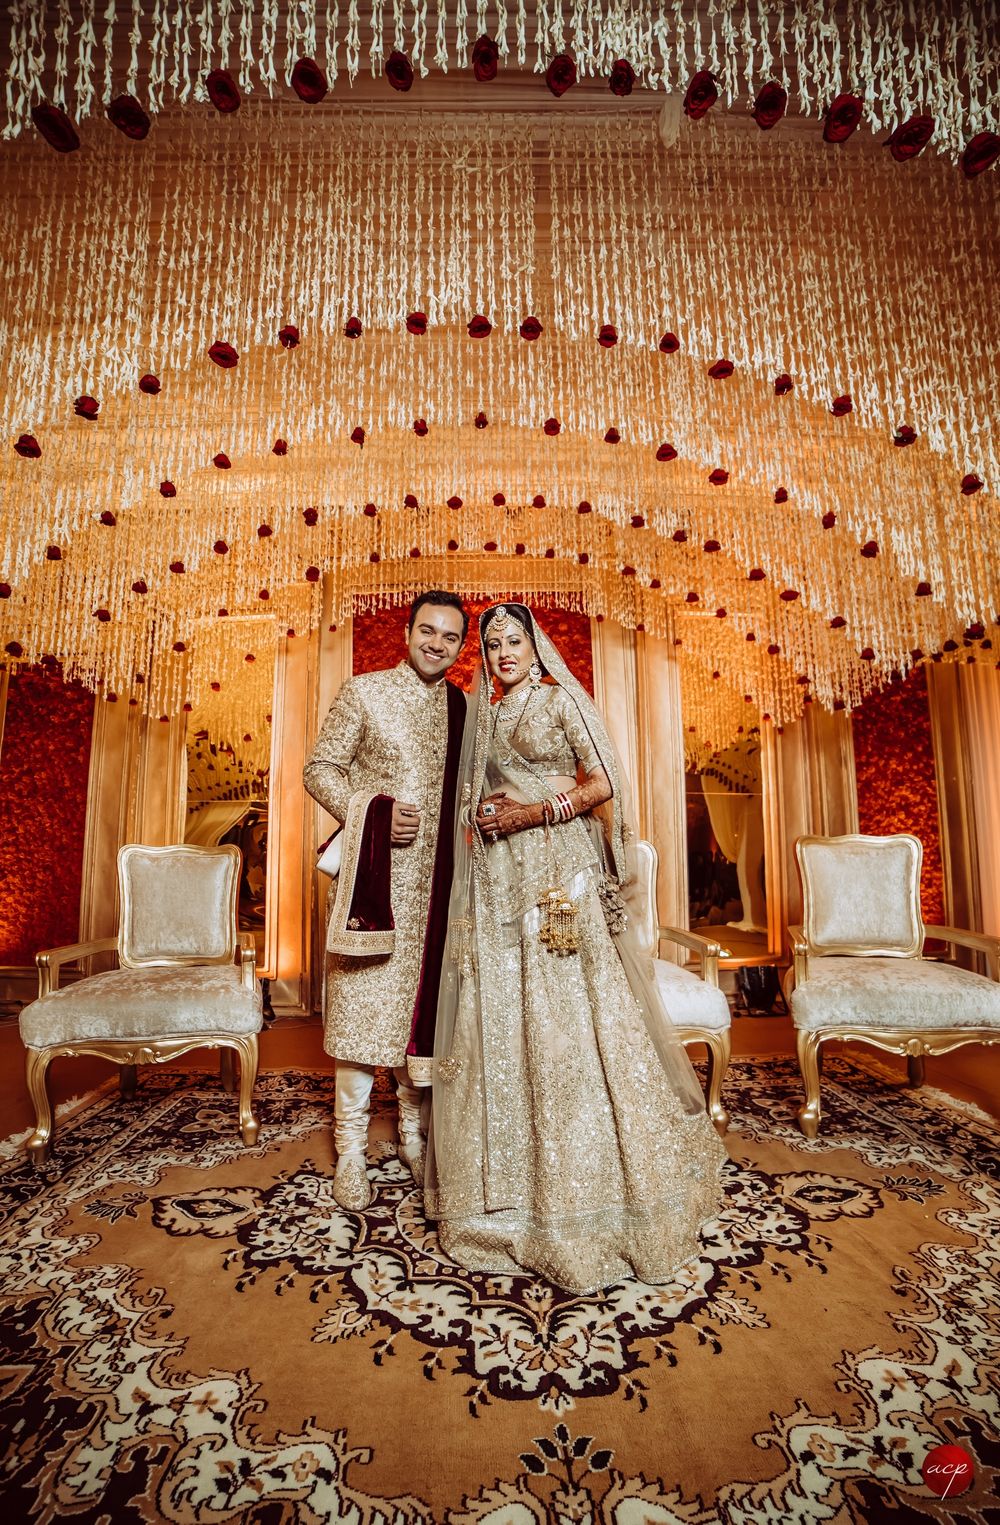 Photo of Grand wedding decor with bride and groom in gold